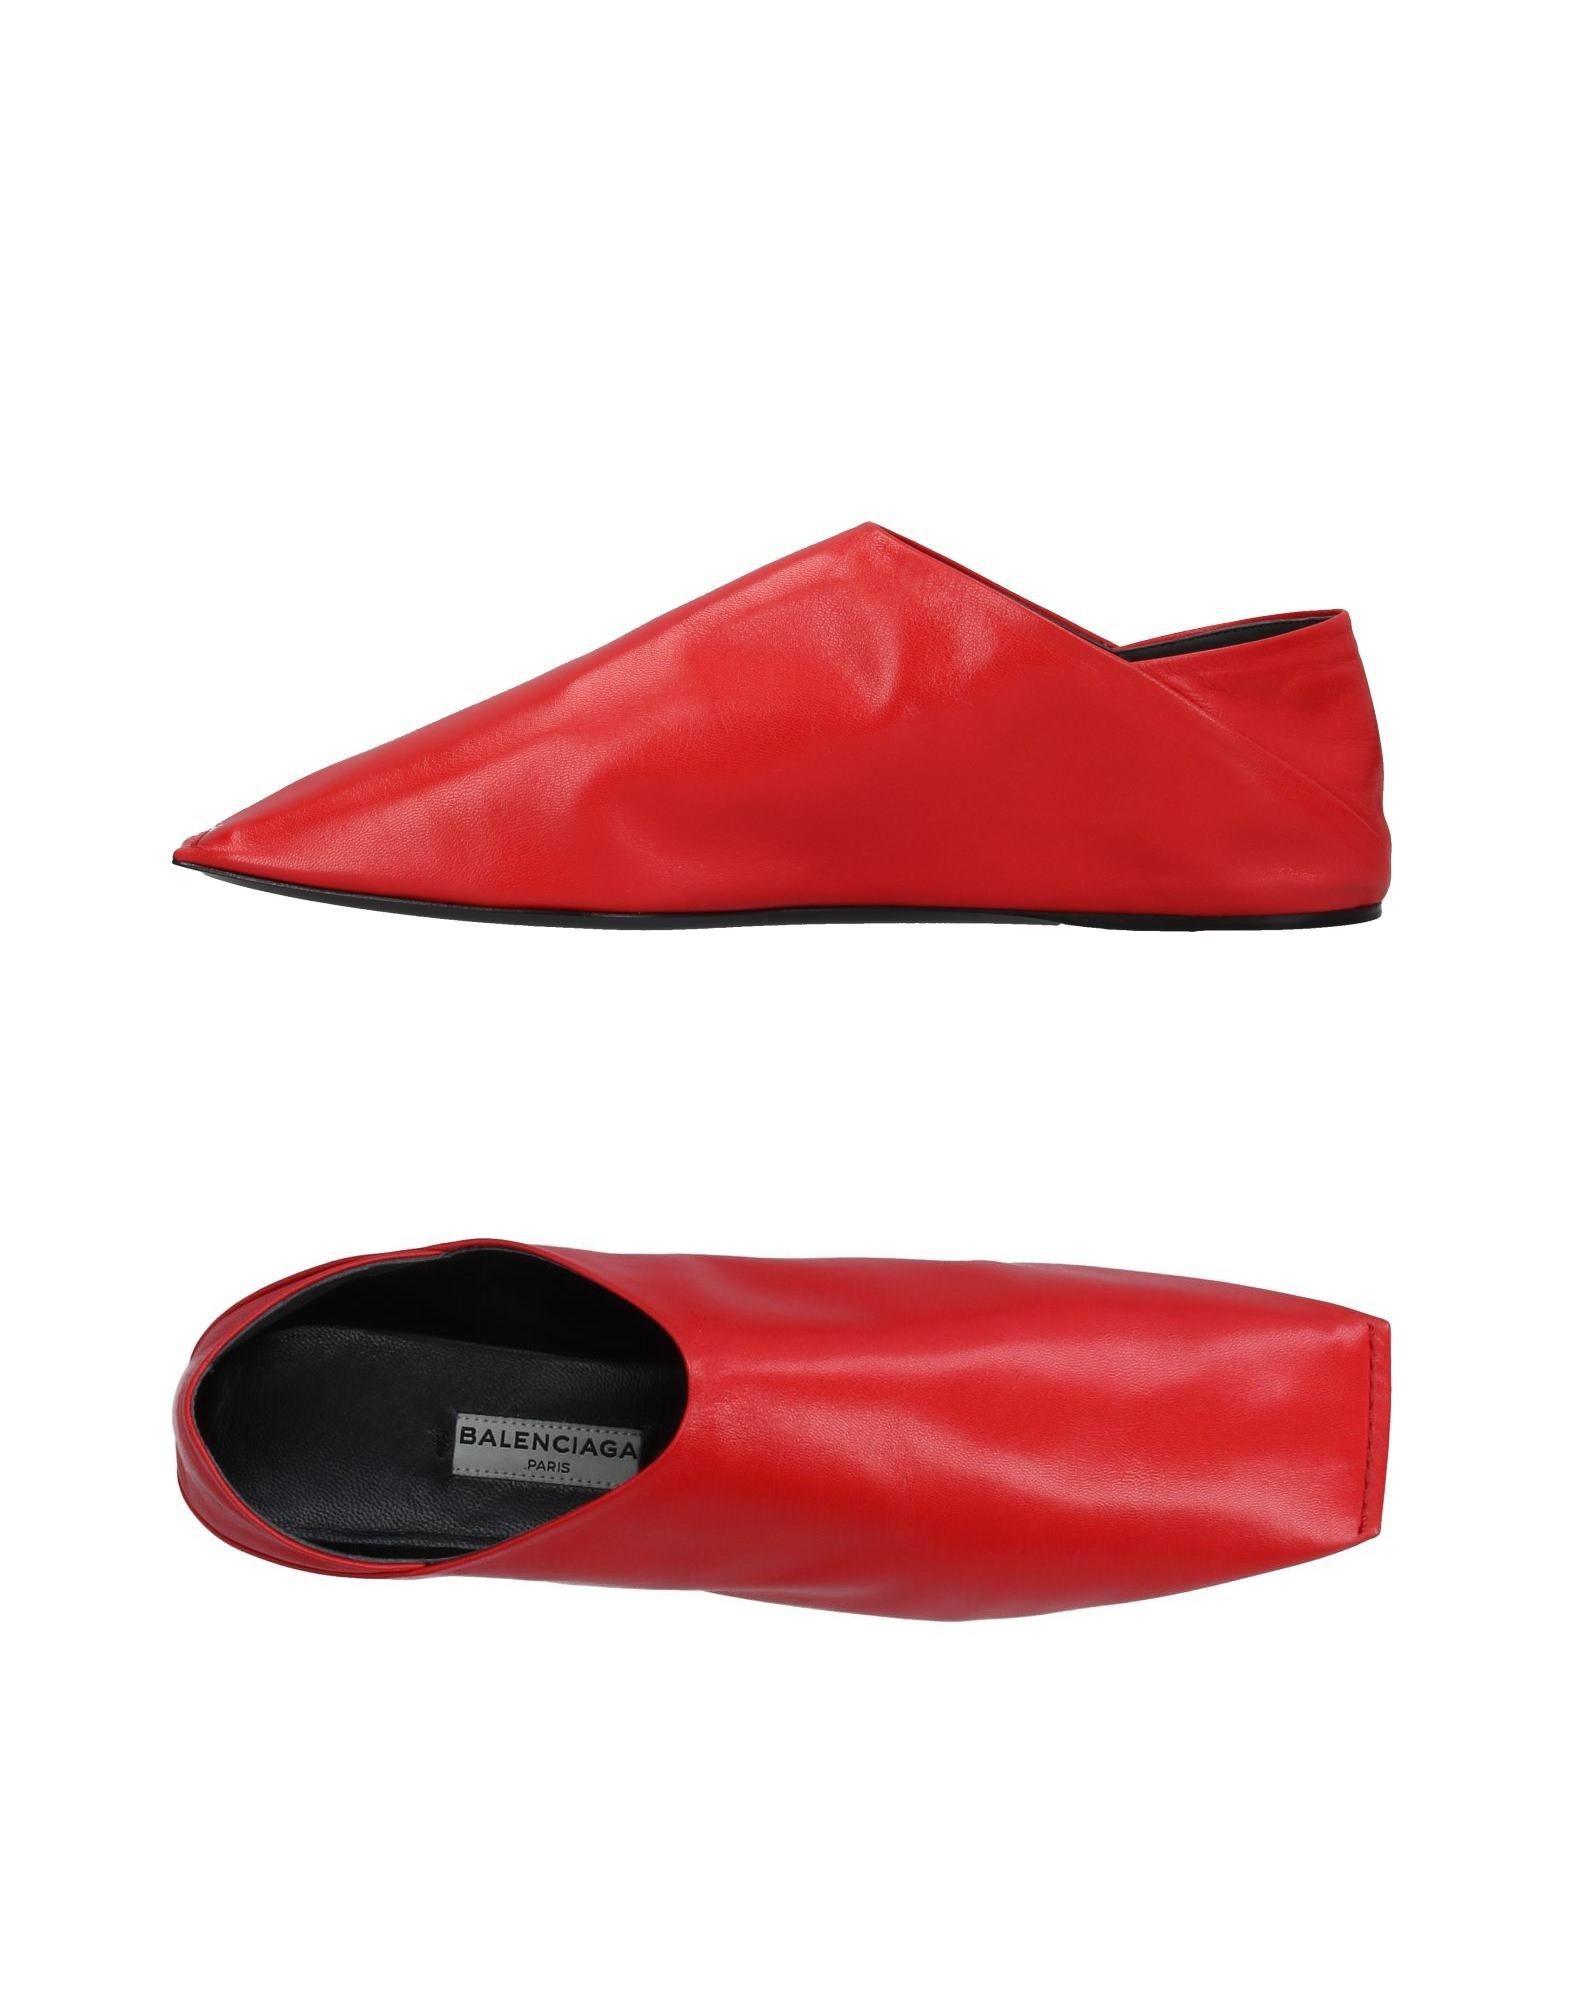 Balenciaga Leather Loafer in Red - Lyst